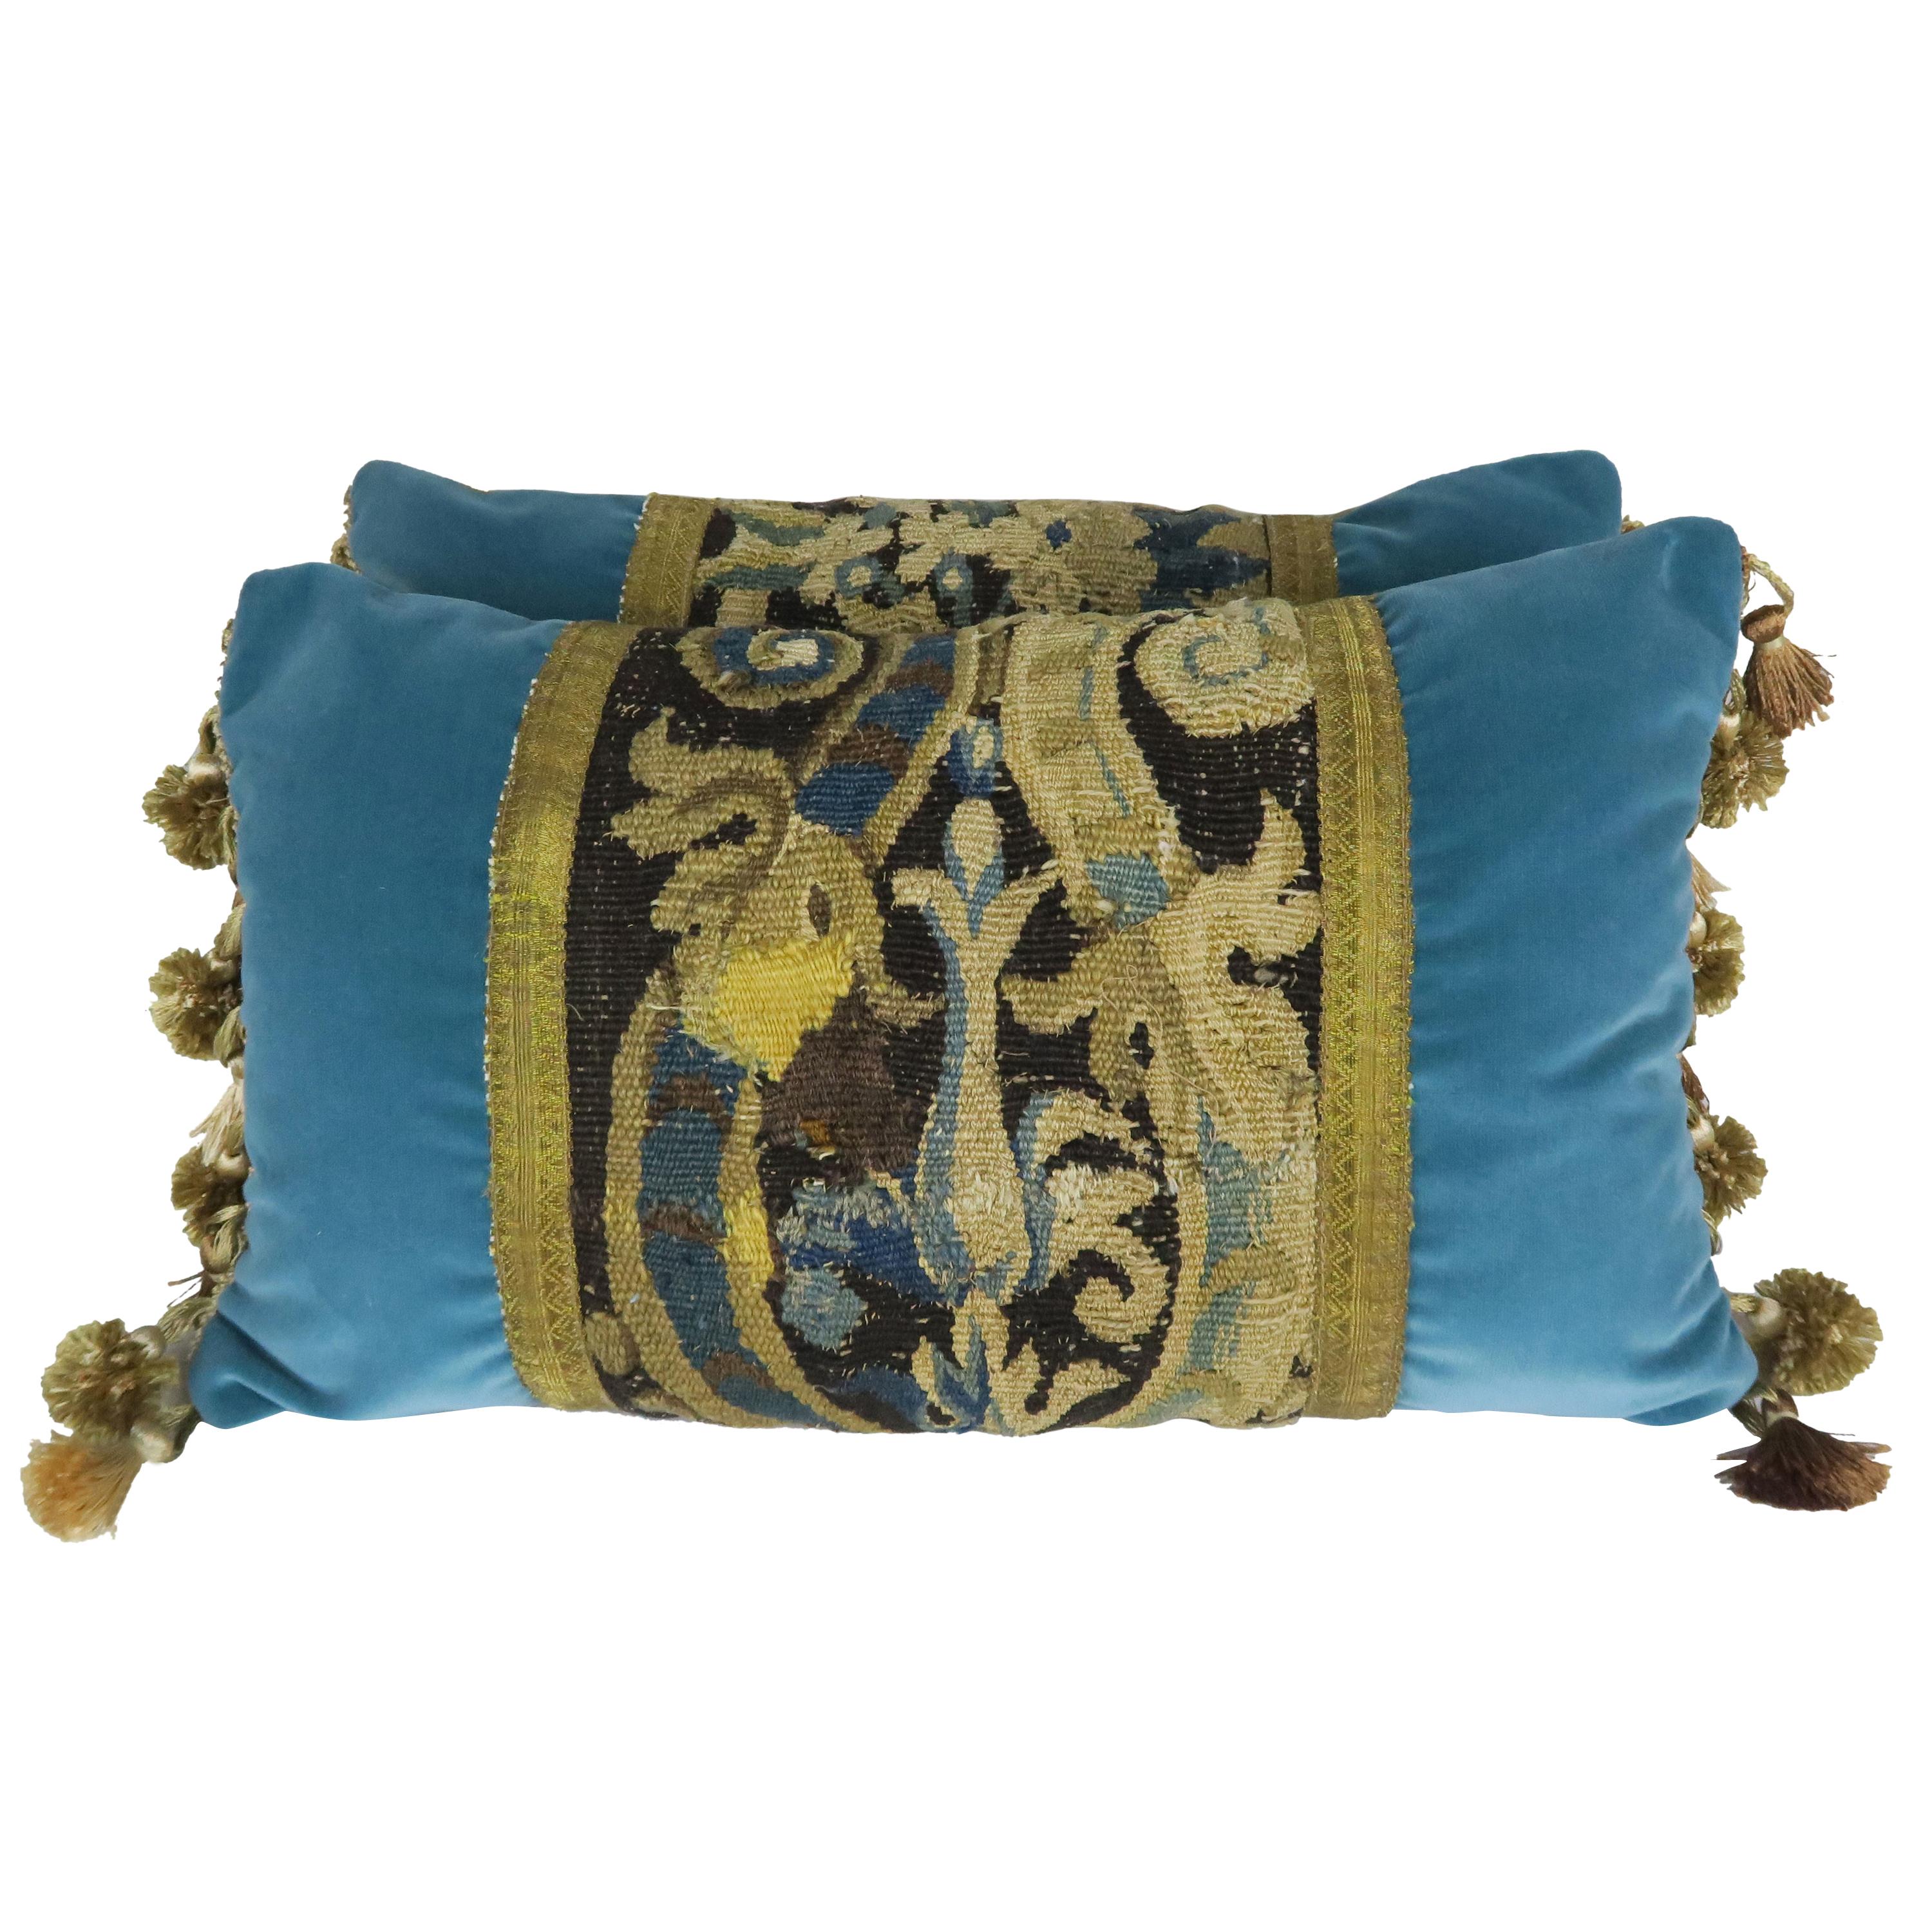 18th Century Tapestry Pillows Designed by Melissa Levinson